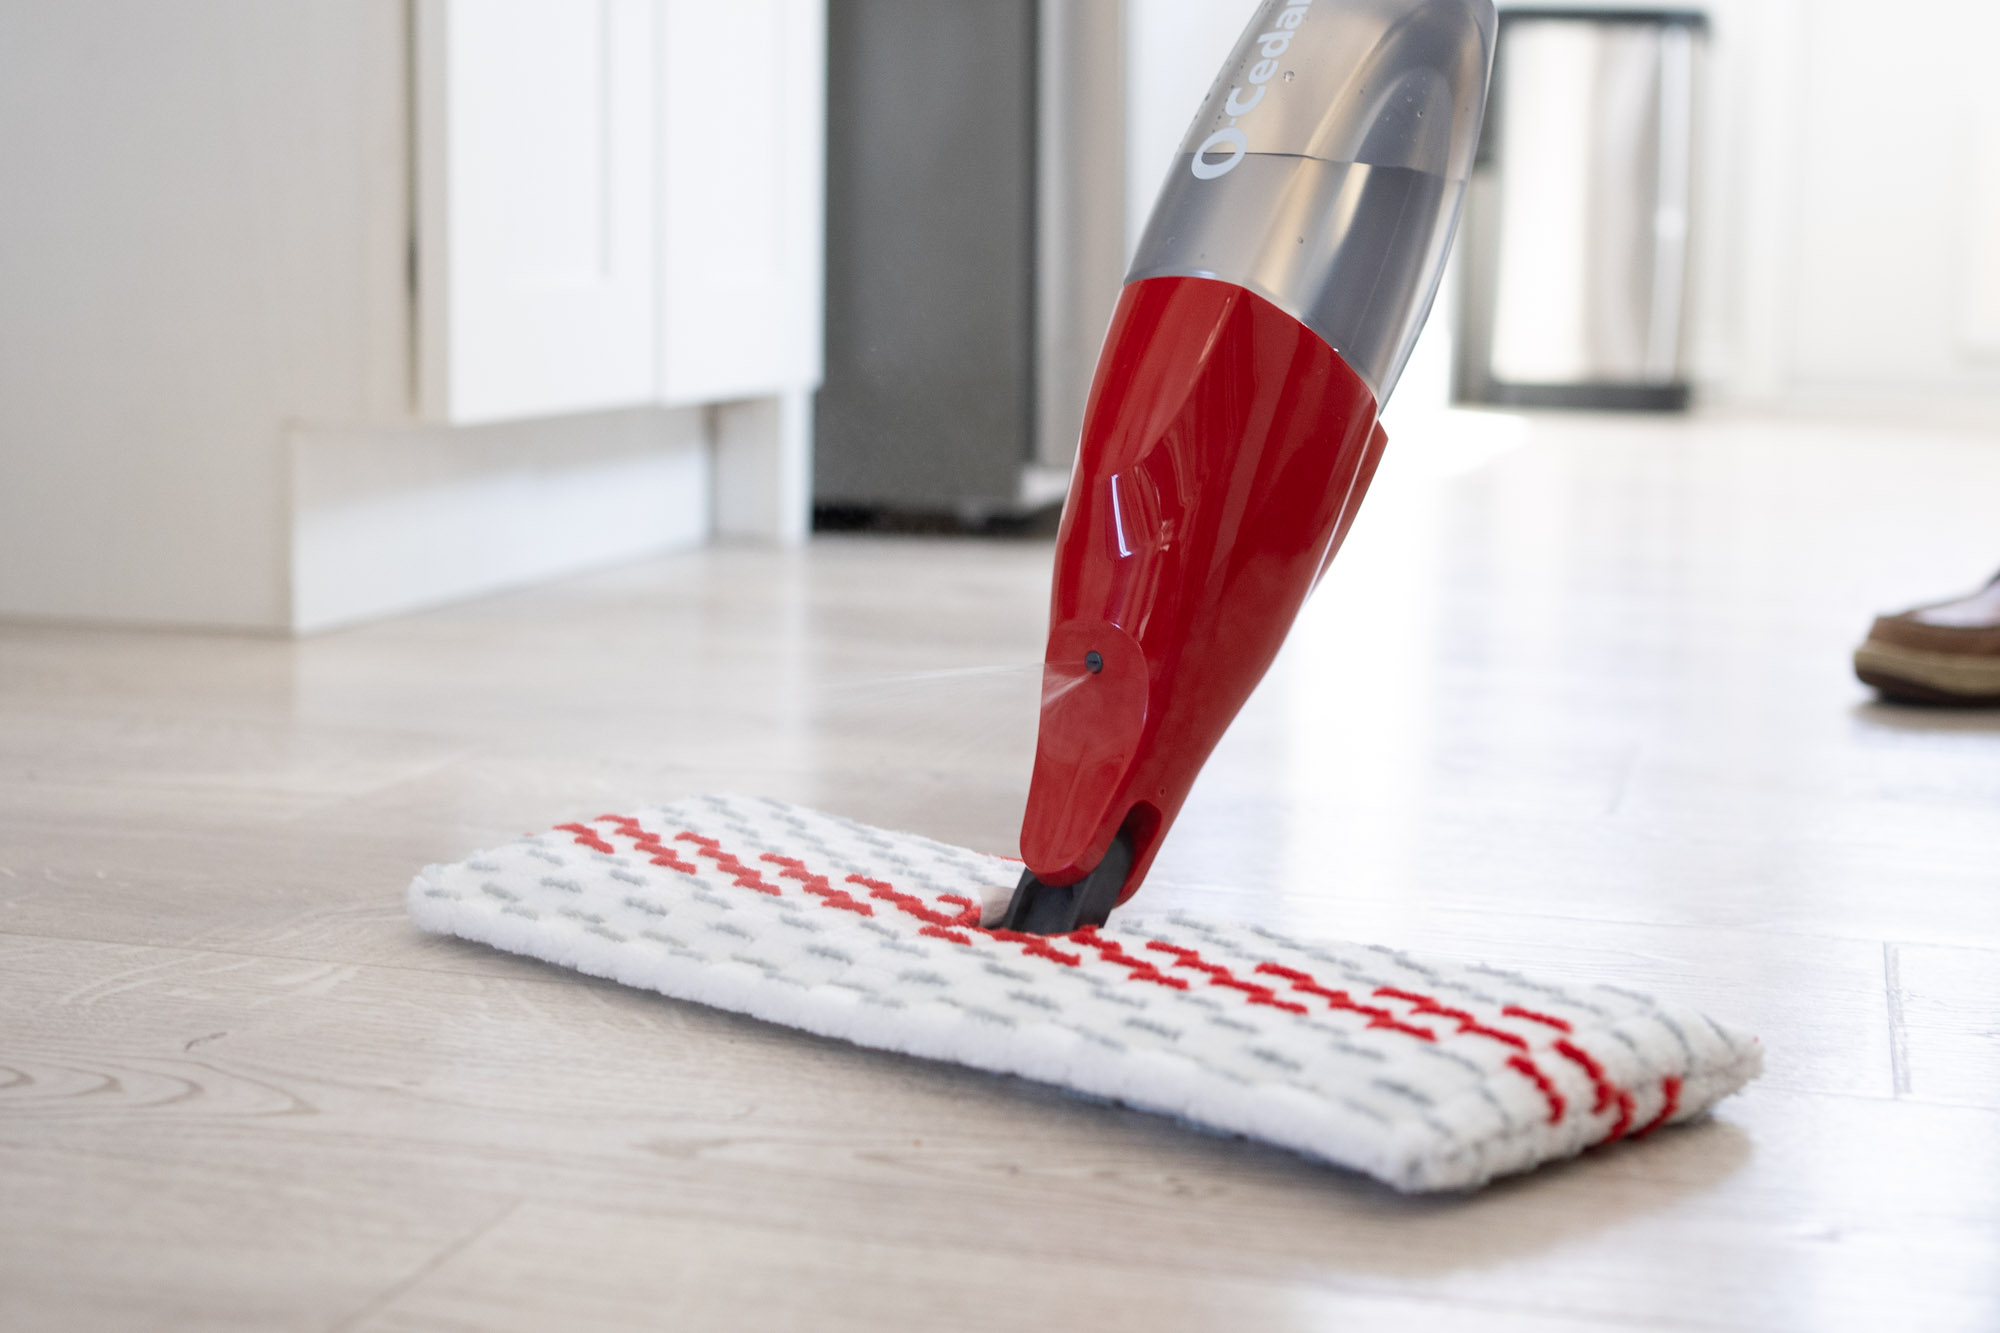 Best floor mops of 2023 for cleaning tiles, hardwood and laminate